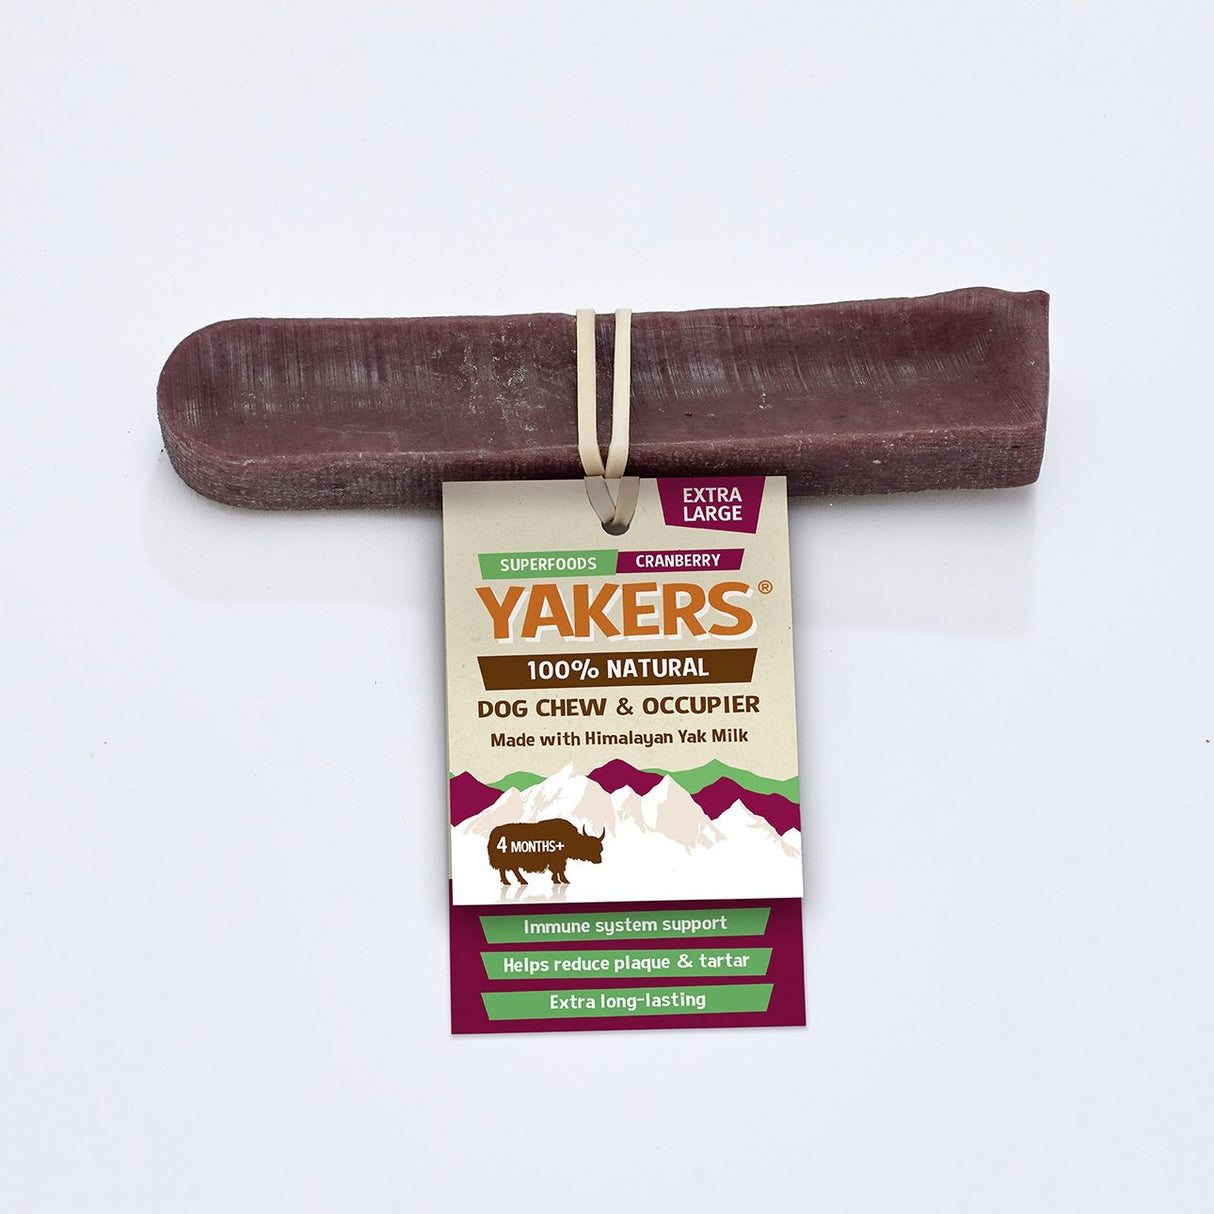 Yakers Cranberry Dog Chew, Yakers, XL